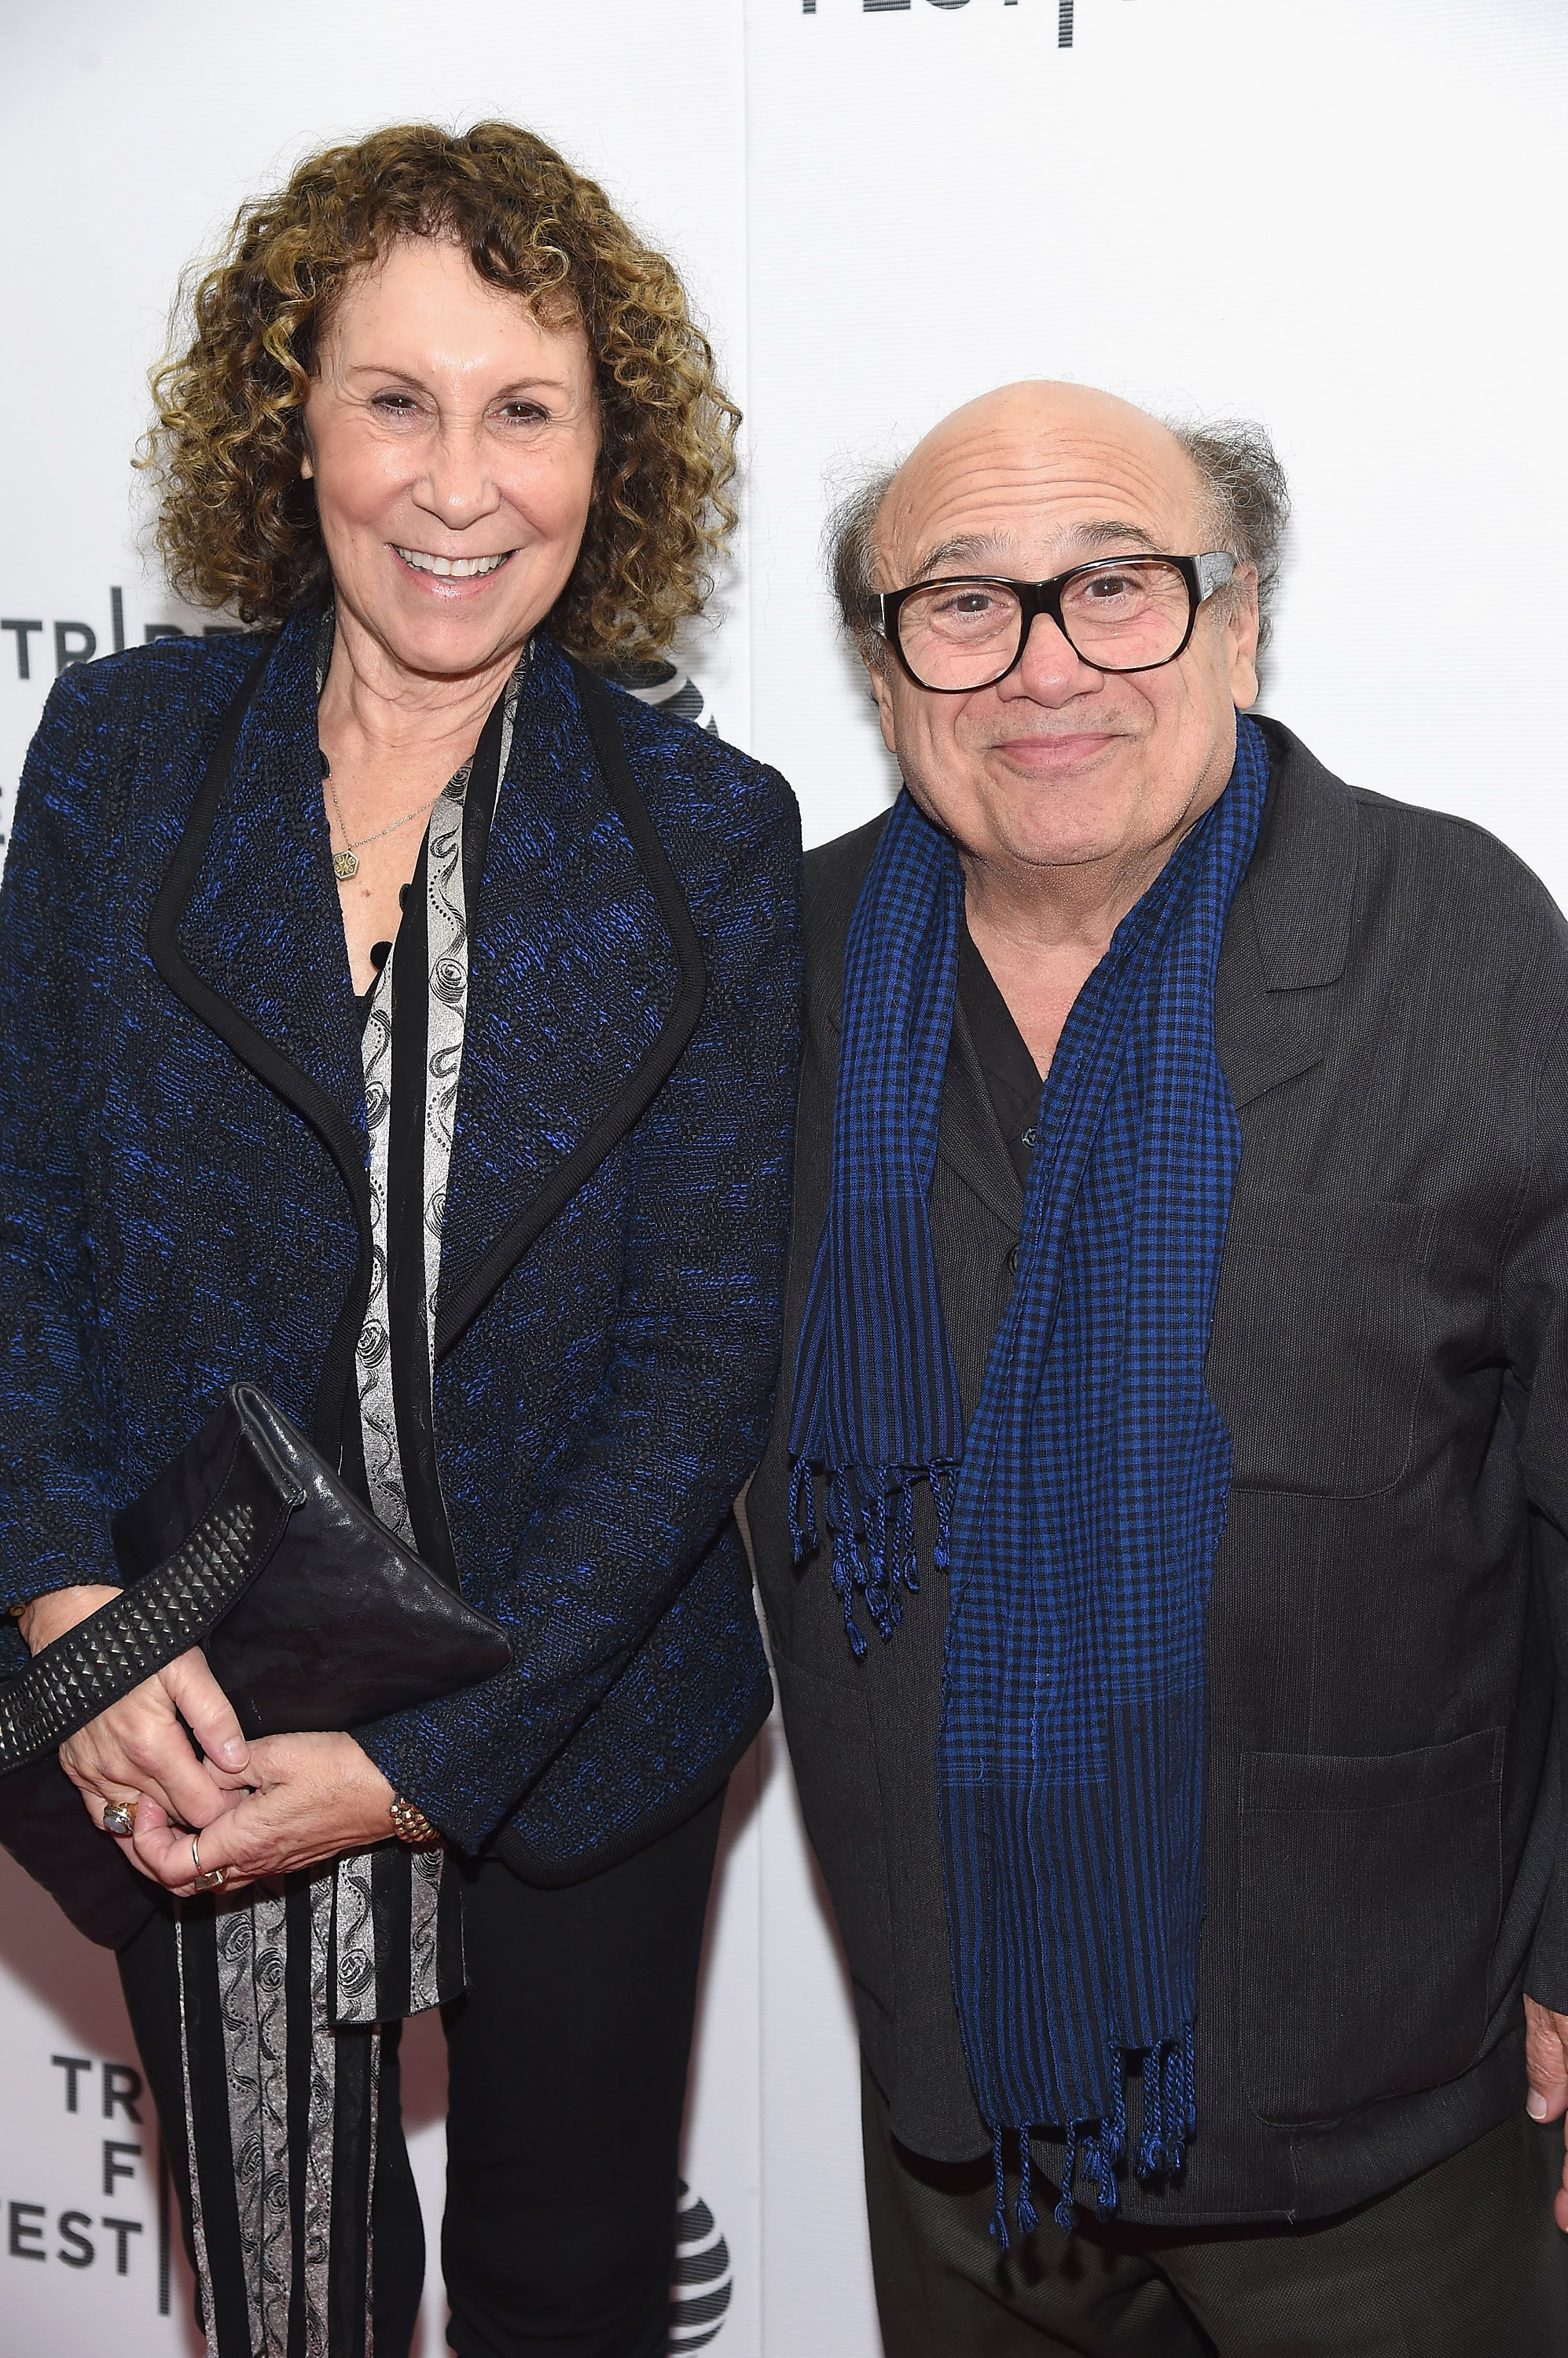 Rhea Perlman and director Danny DeVito attending a film screening in New York City on April 15, 2016 | Source: Getty Images